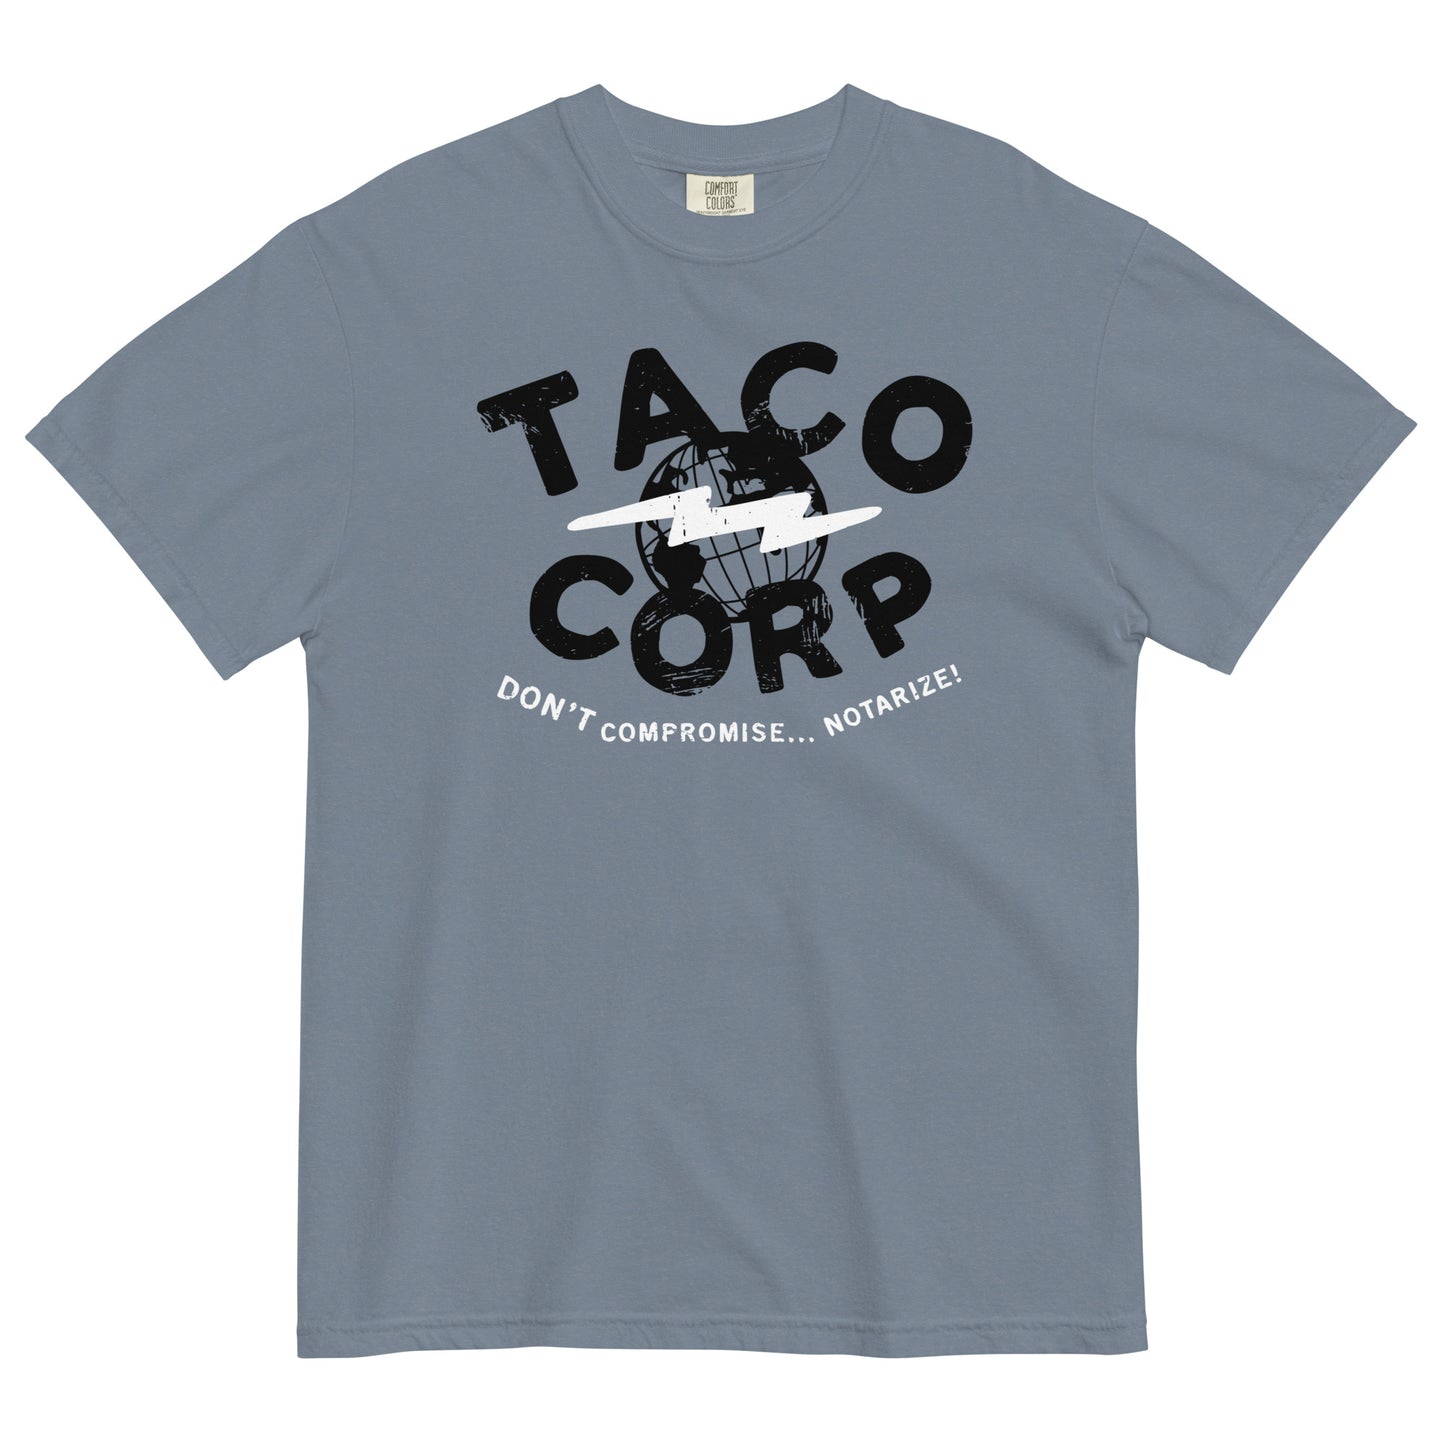 Taco Corp Men's Relaxed Fit Tee